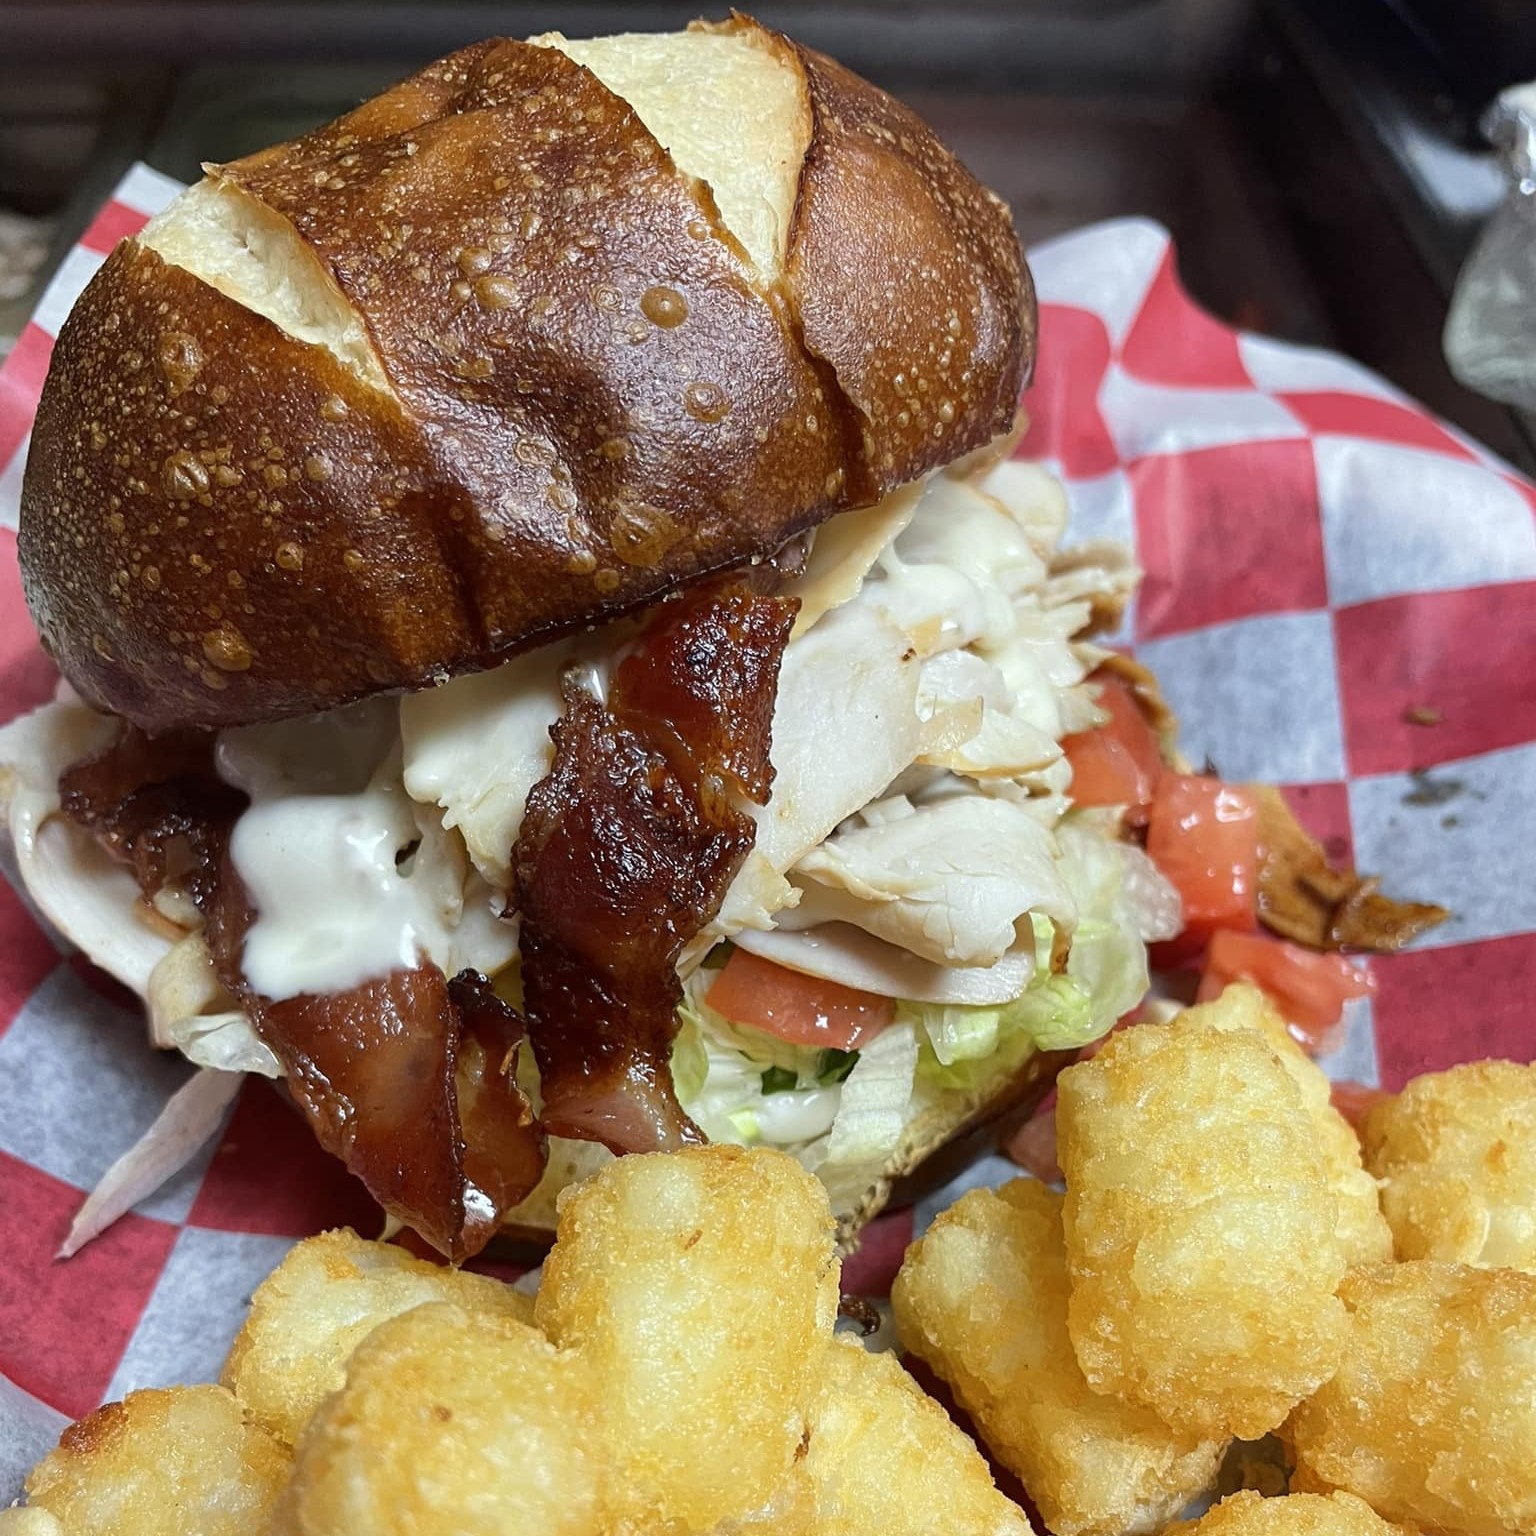 A sandwich and tater tots at the Barn Door.